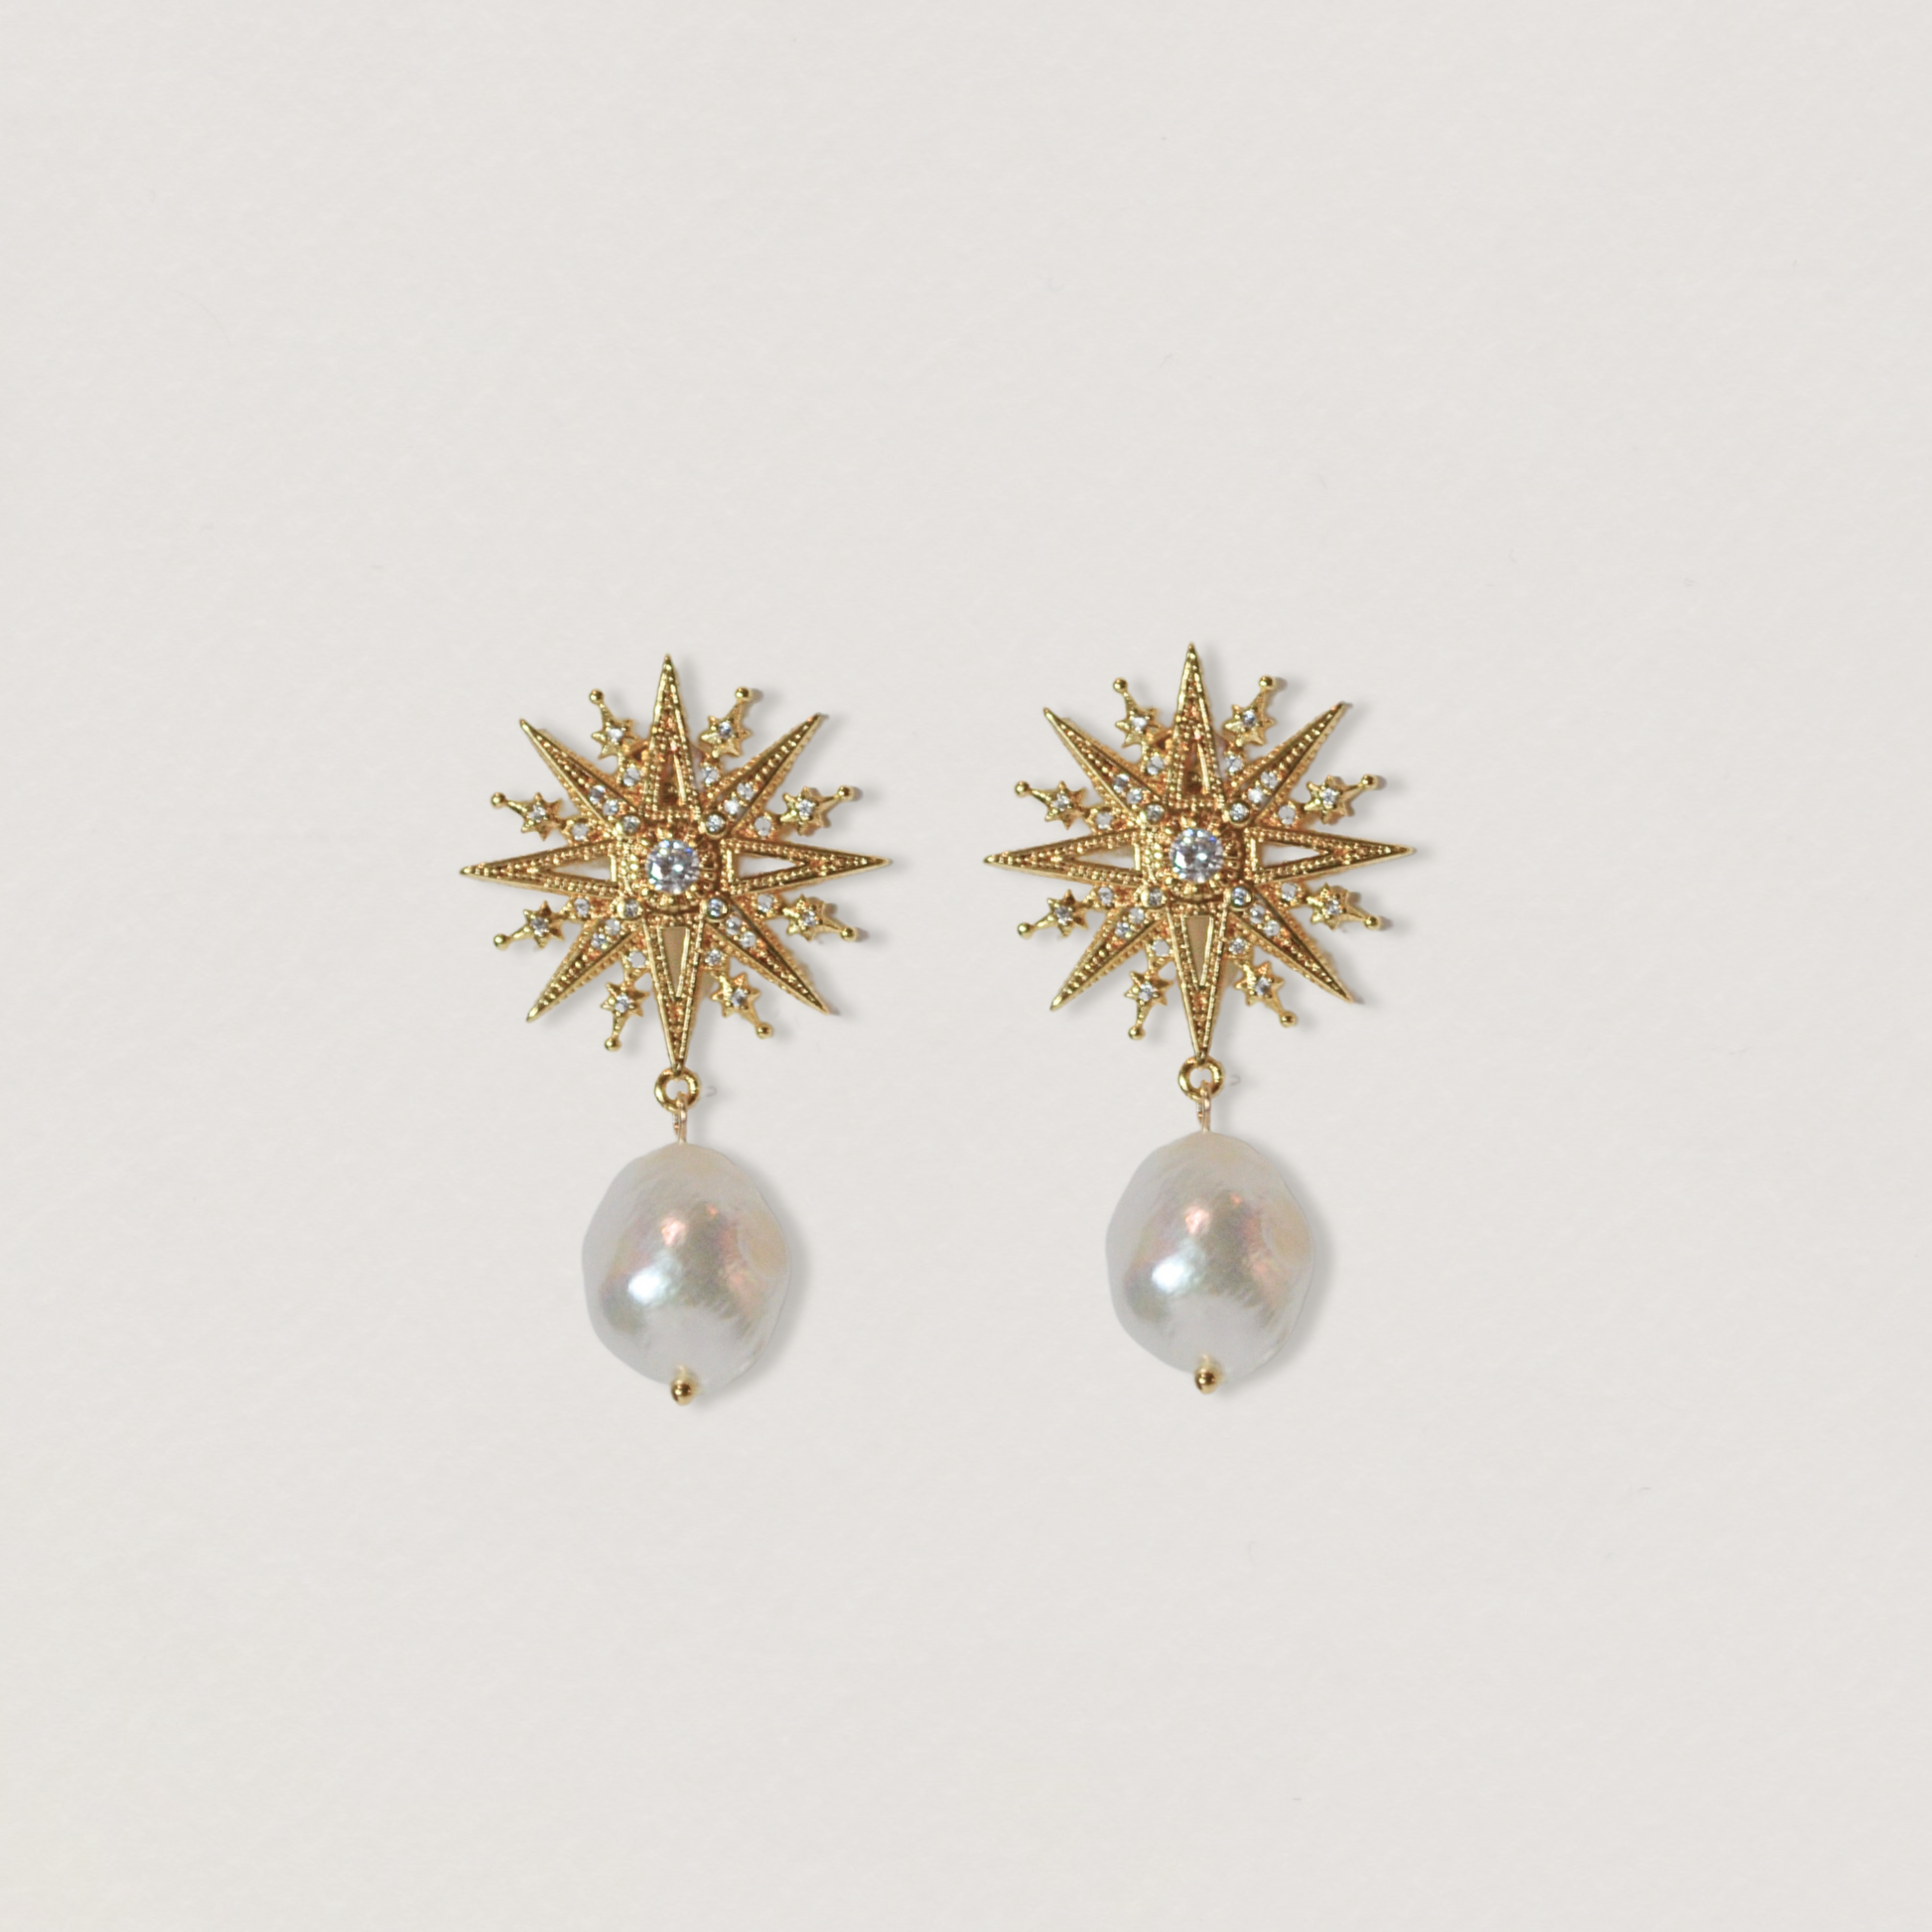 Clementine collection, single pearl, bold gold star earrings 